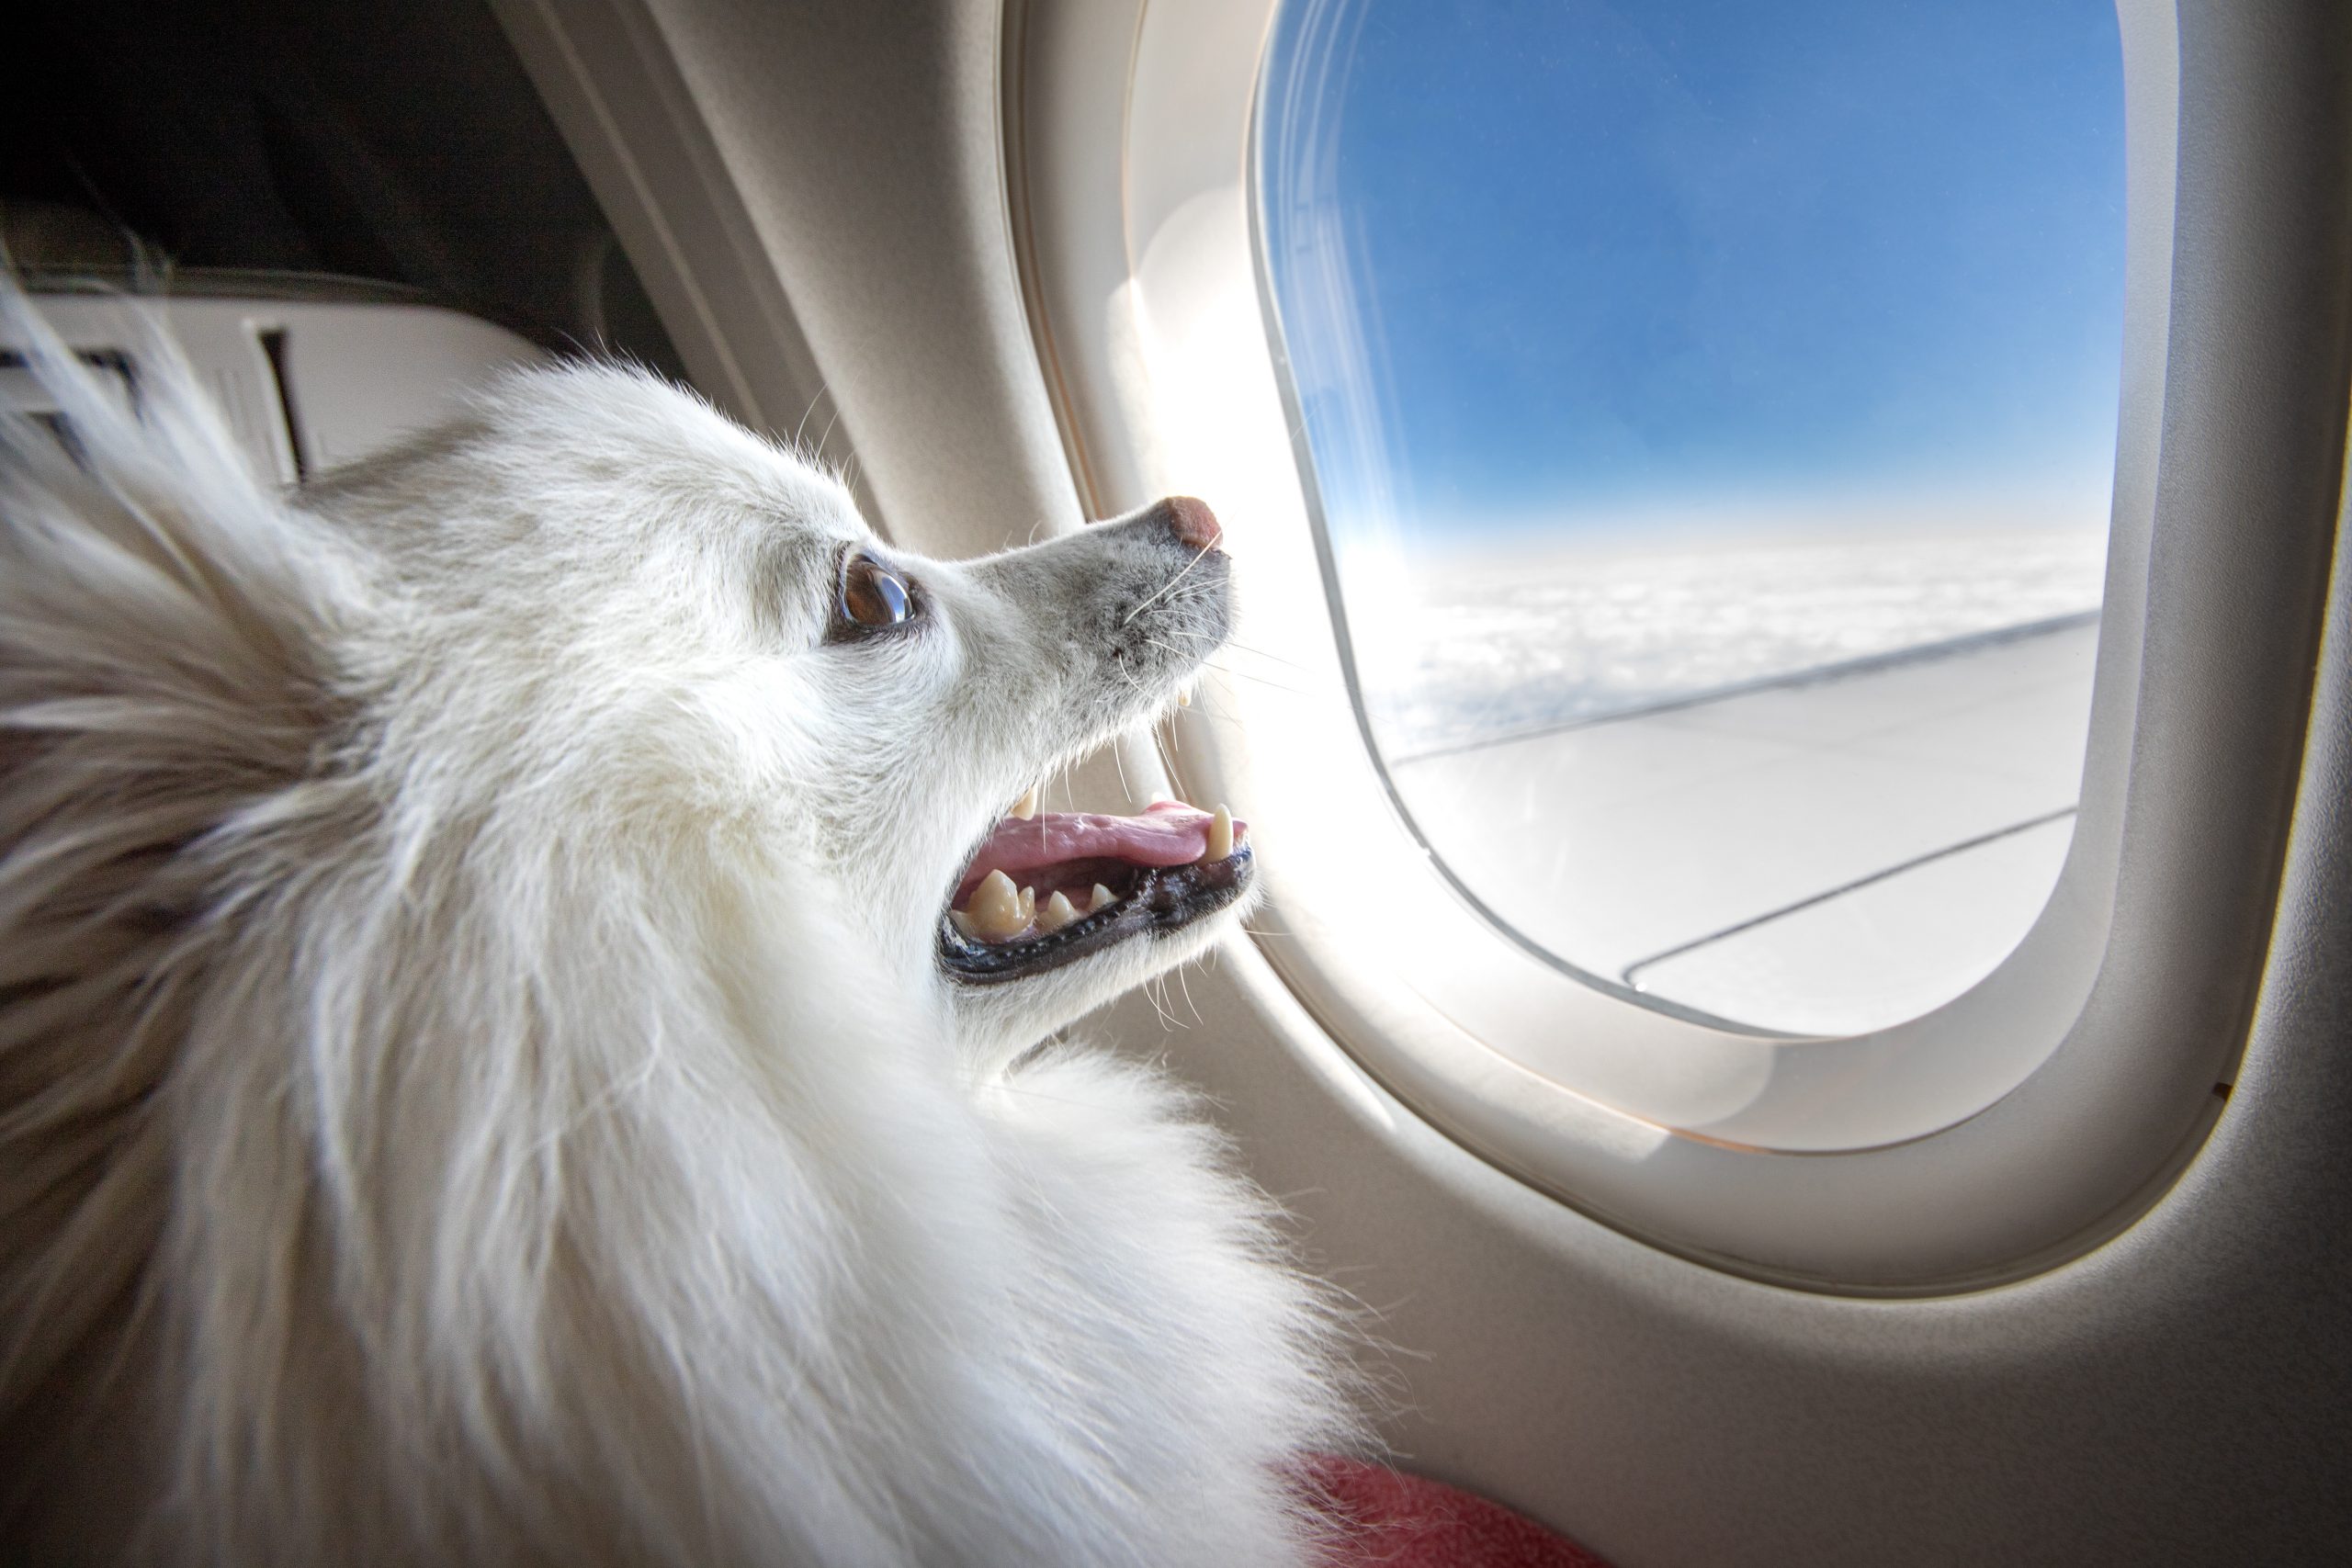 When Your Dog Bites Someone on an Airplane